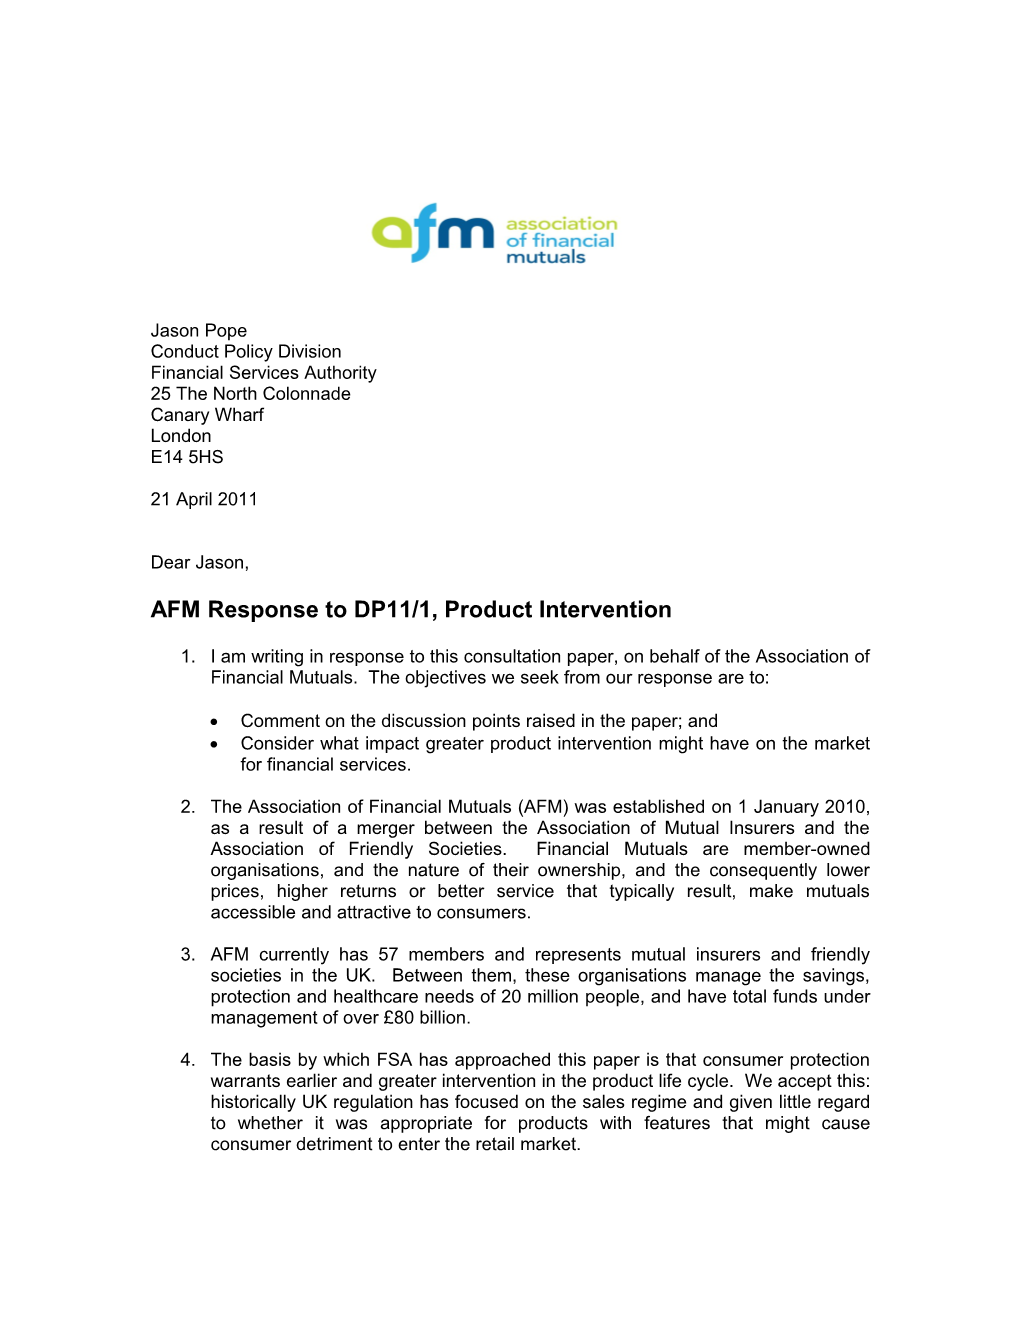 AFM Response Todp11/1, Product Intervention